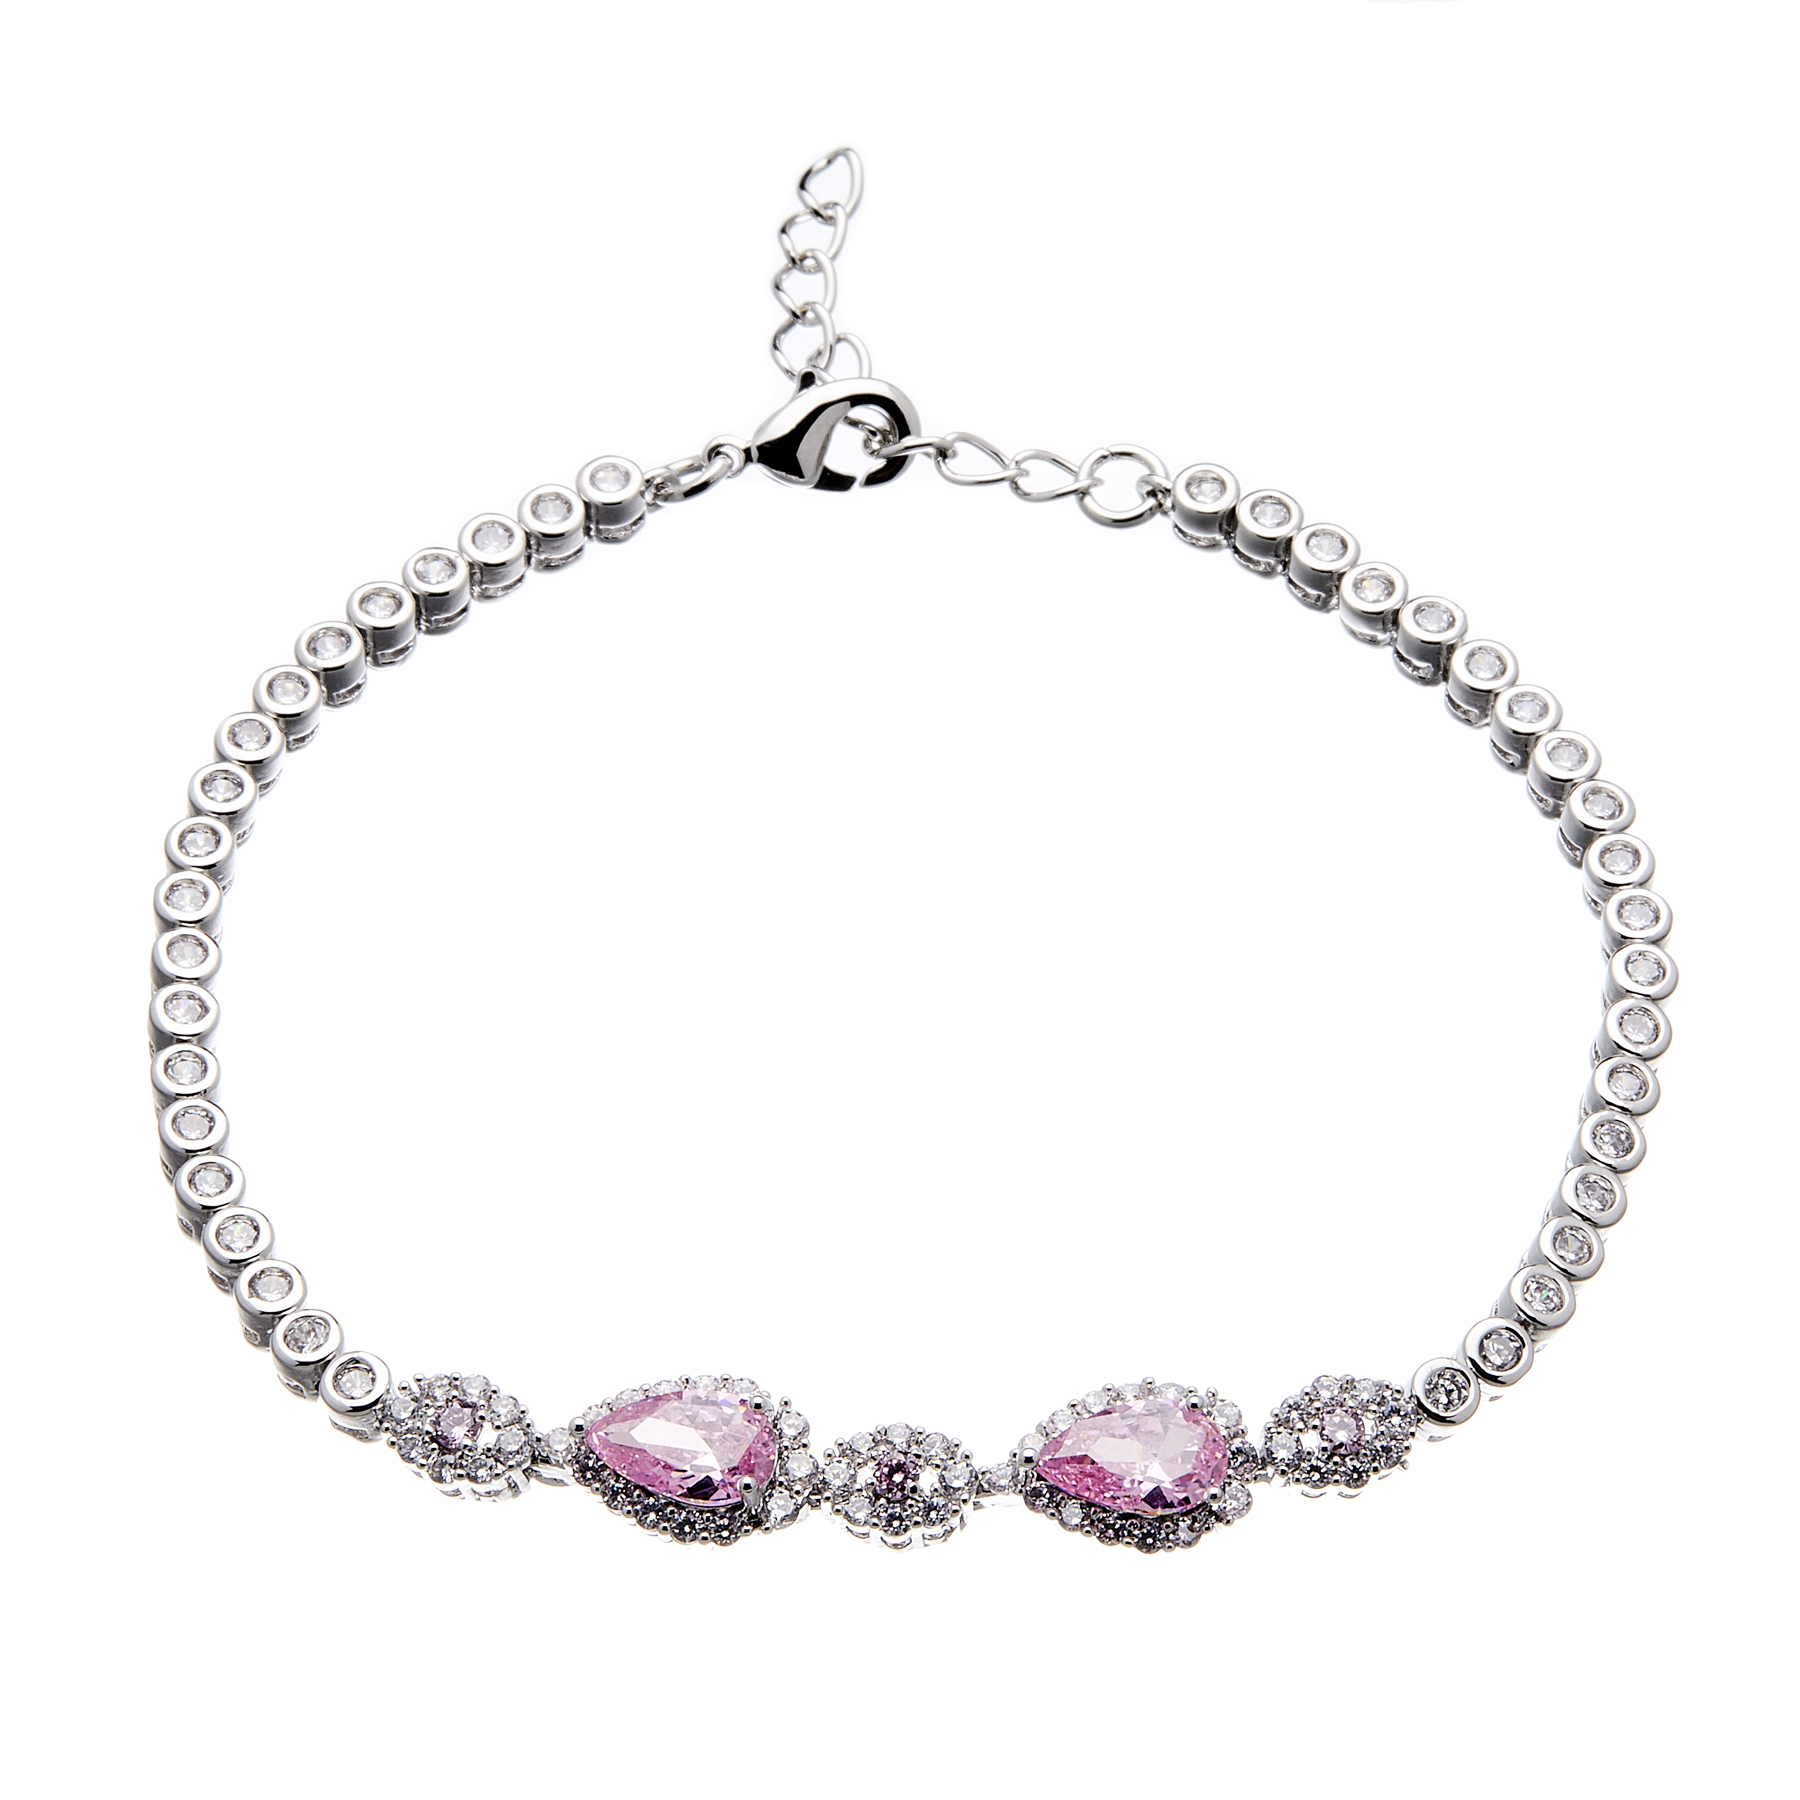 Silver Bracelet with pink and clear Cubic Zirconia stones - Nel